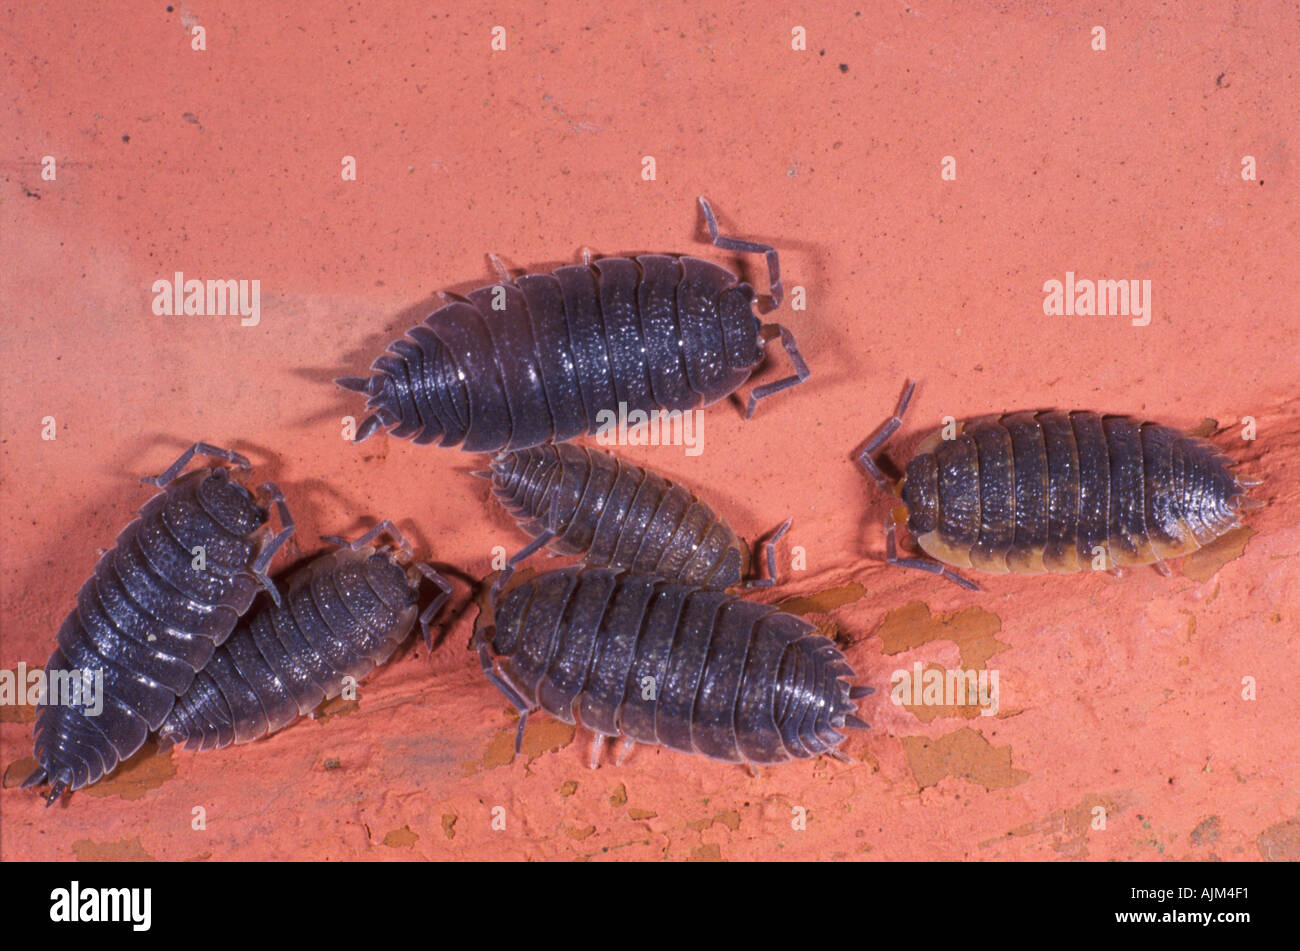 sowbug woodlouse Porcelio scaber a terrestrial isopod many together at red surface Stock Photo